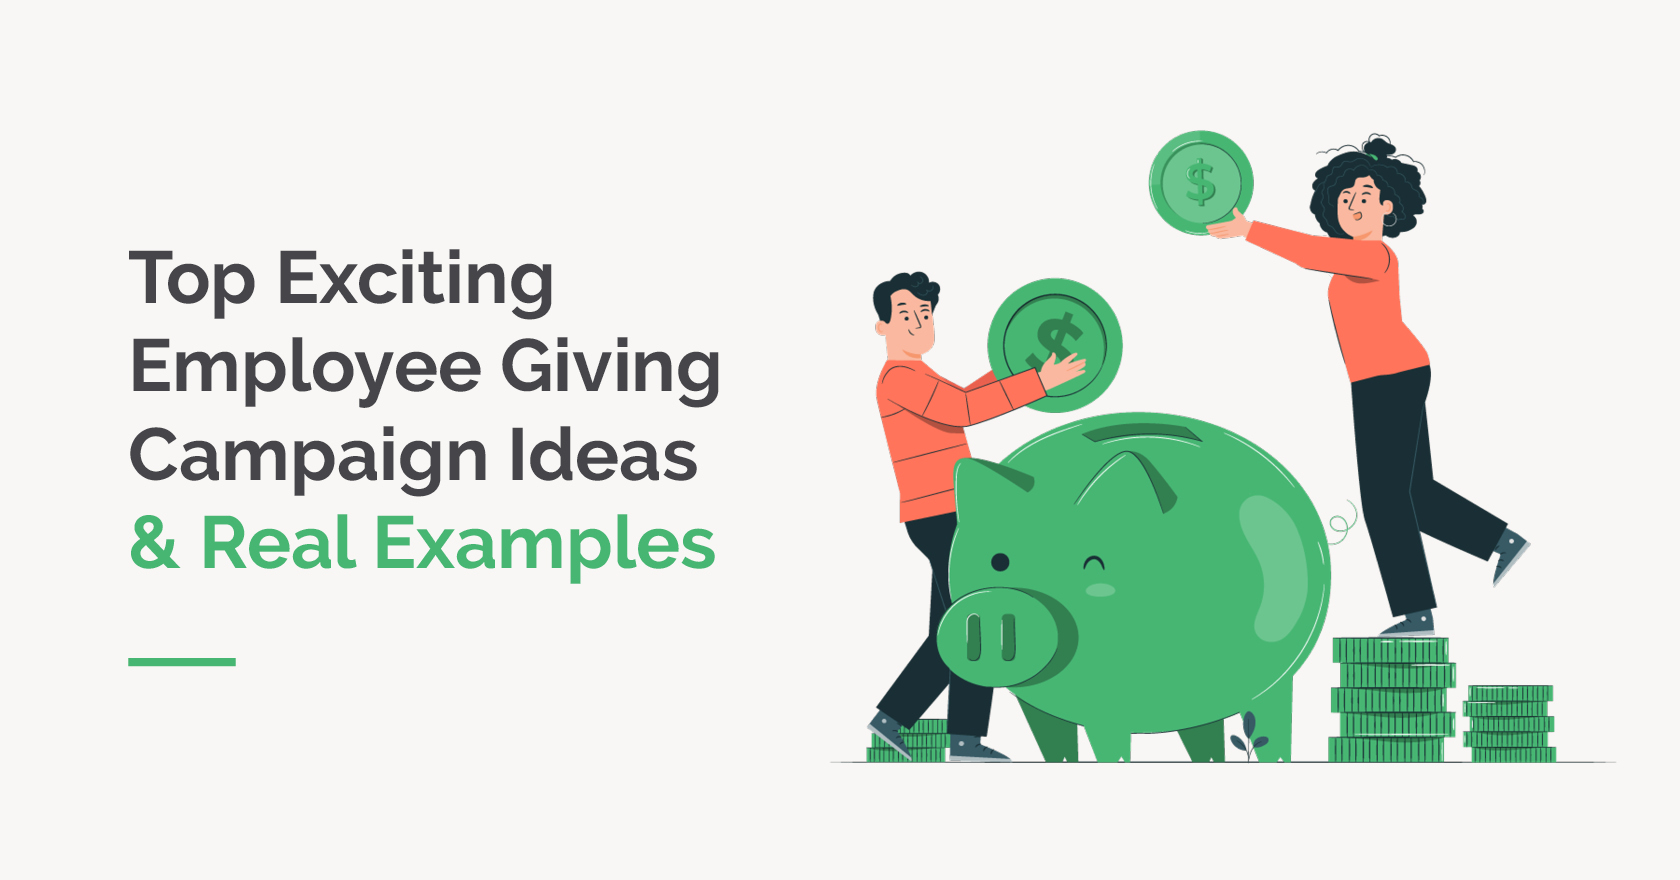 This guide will cover nine year-round employee giving campaign ideas and real examples.